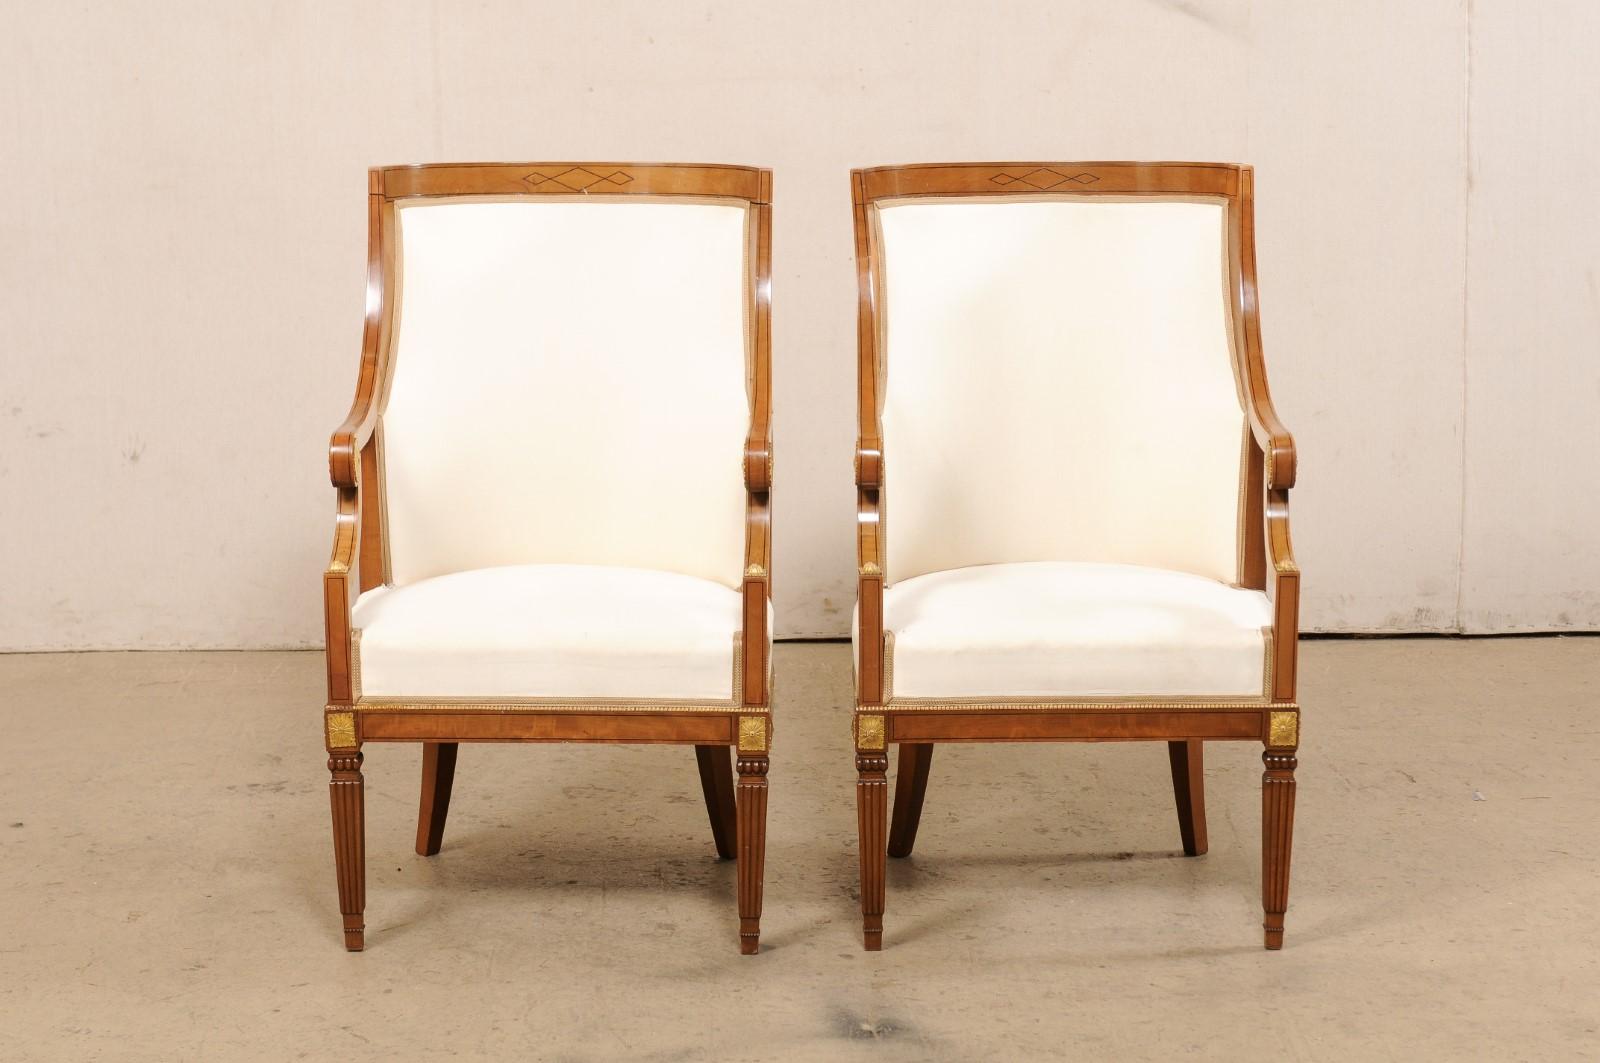 Italian Pair of Barrel-Back Carved-Wood & Upholstered Armchairs Mid-20th Century For Sale 7